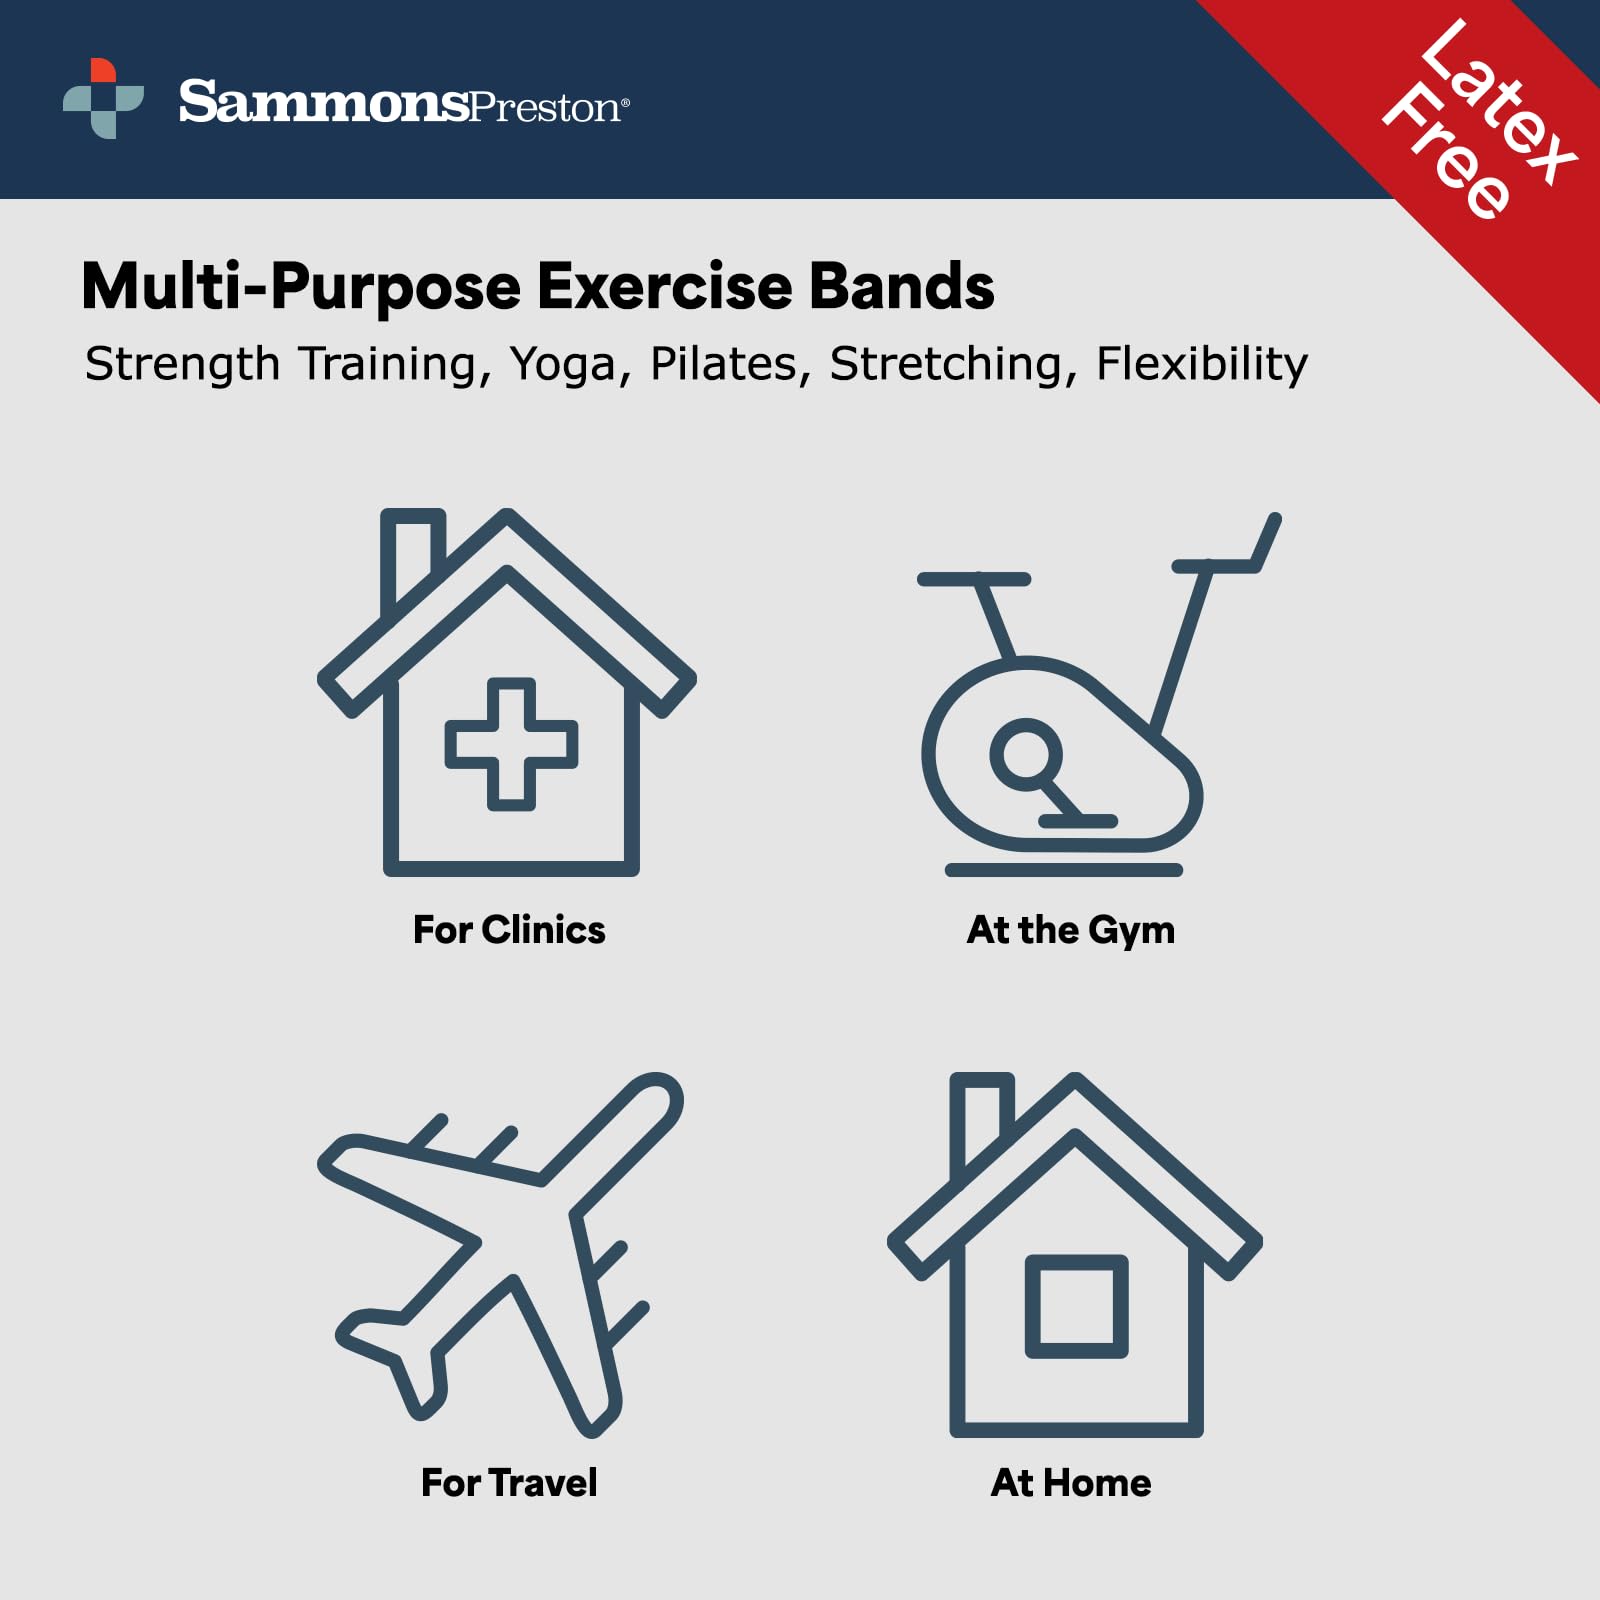 Sammons Preston Non-Latex Exercise Band, 5 Pack, Improve Strength, Dexterity, and Flexibility, Stretch & Tone All Major Muscle Groups, Set of 5 Includes All Five Increasing Resistance Levels